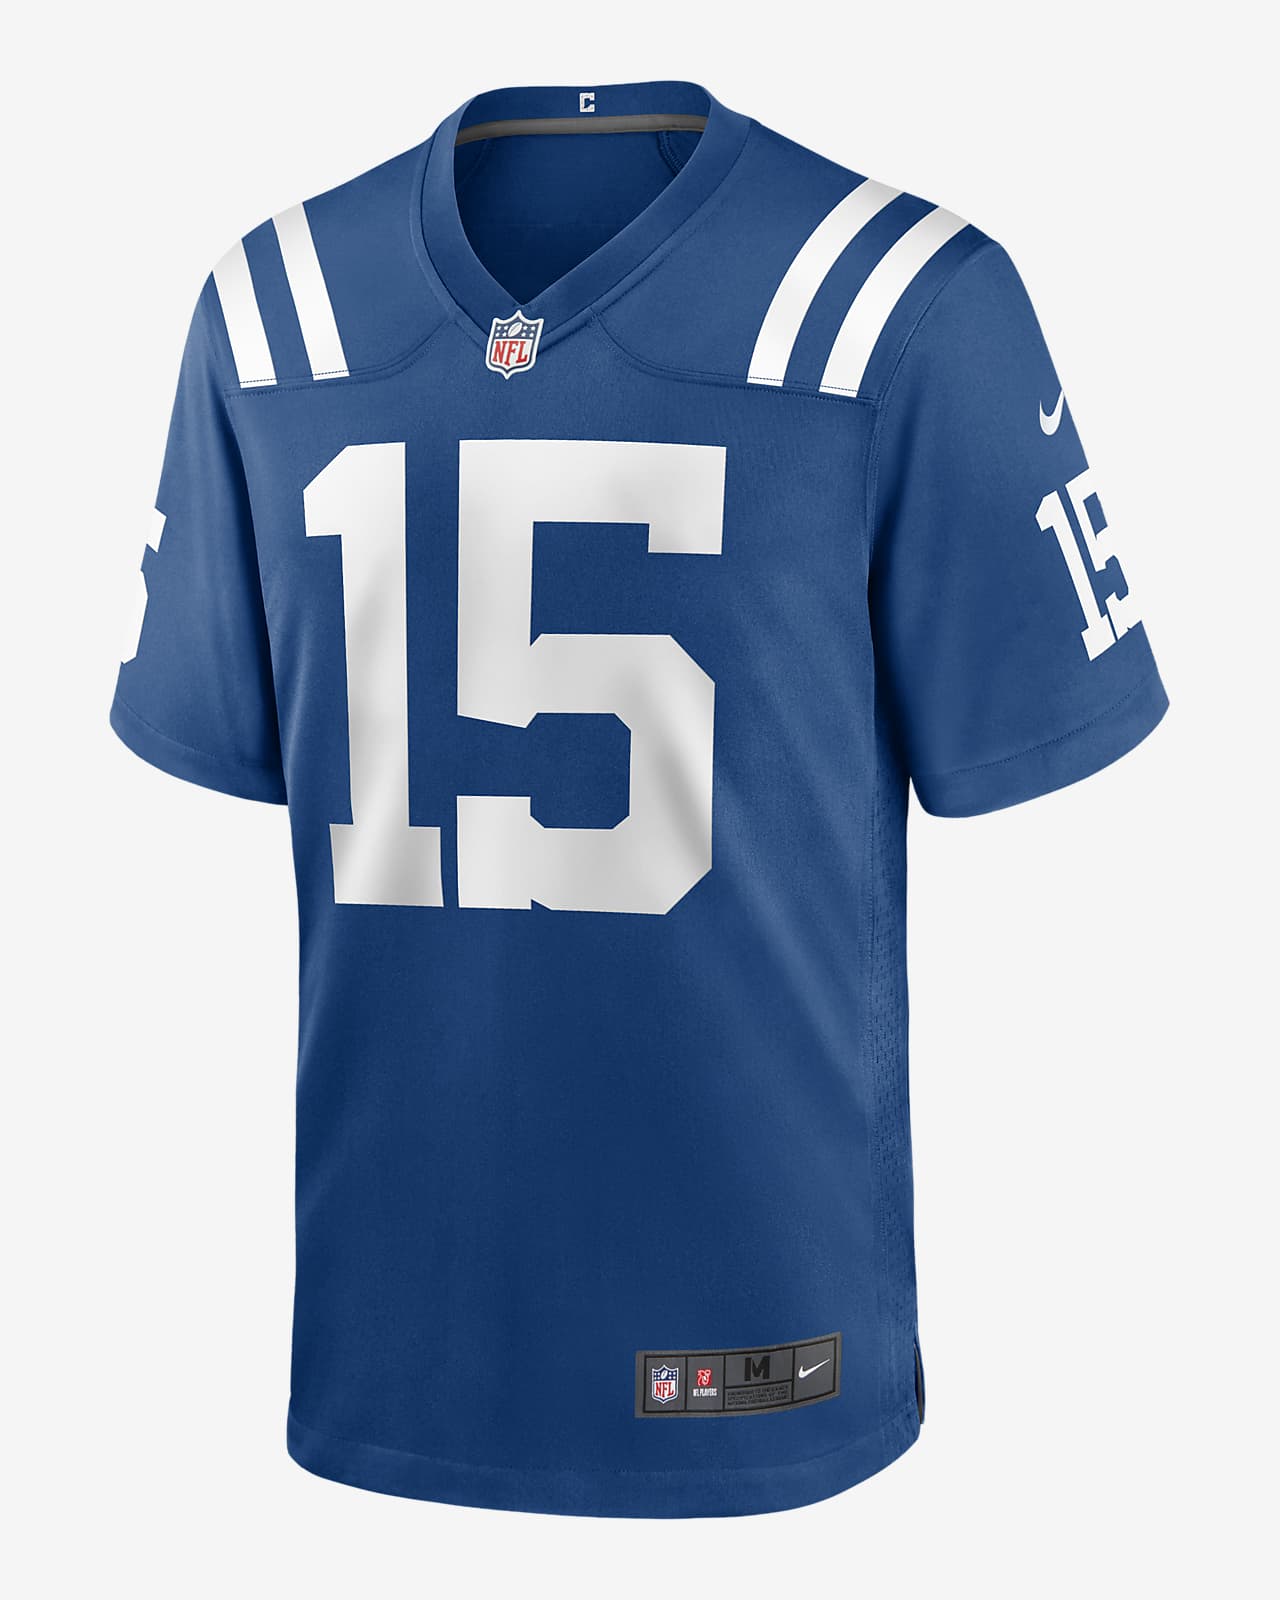 NFL Indianapolis Colts (Parris Campbell) Men's Game Football Jersey